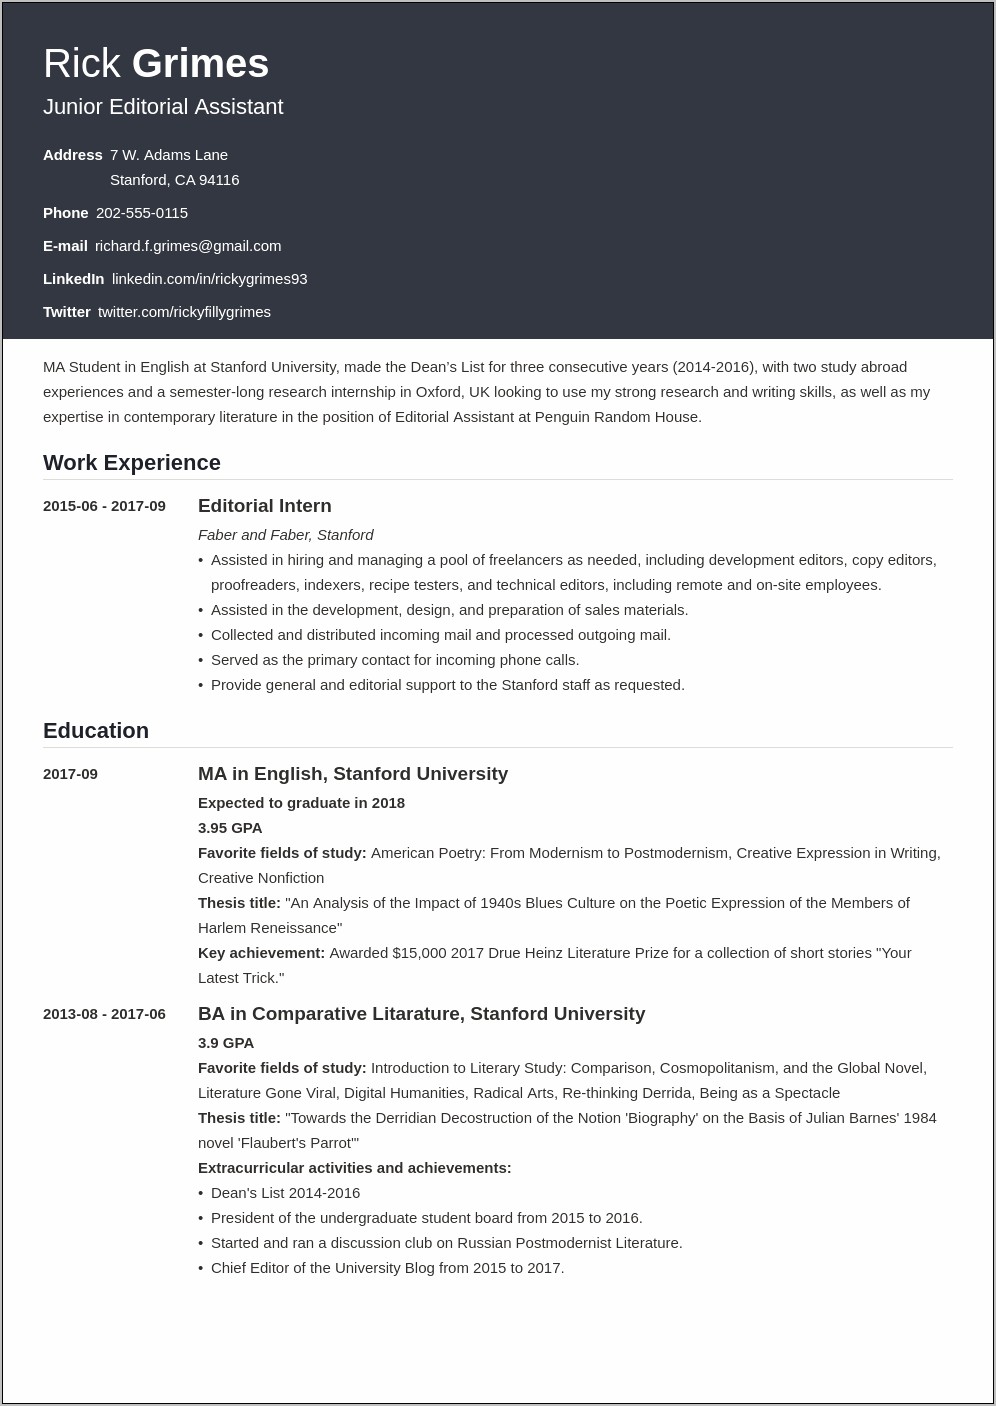 Sample Resume With Onsite Work Experience